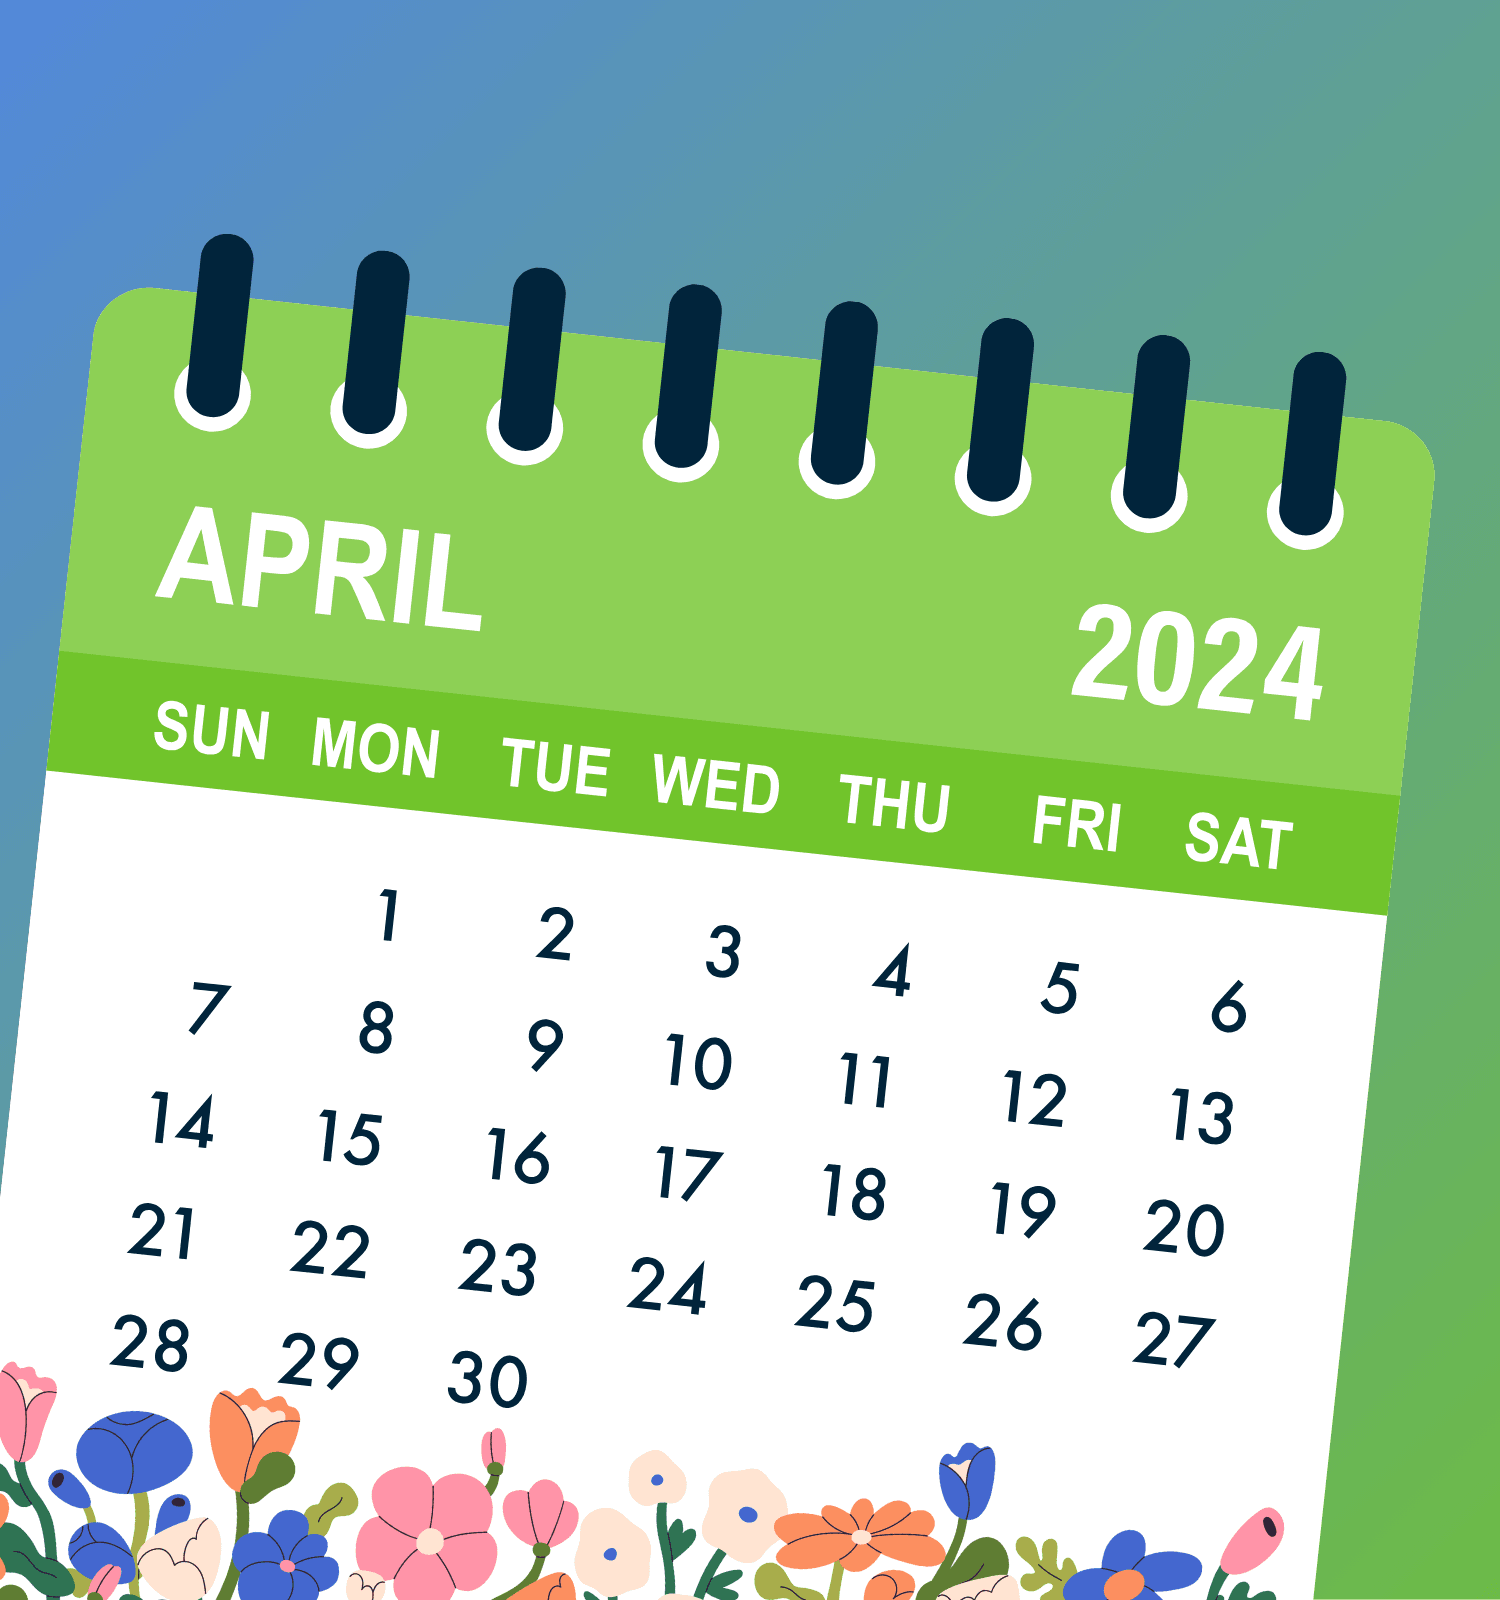 Spring into April Events